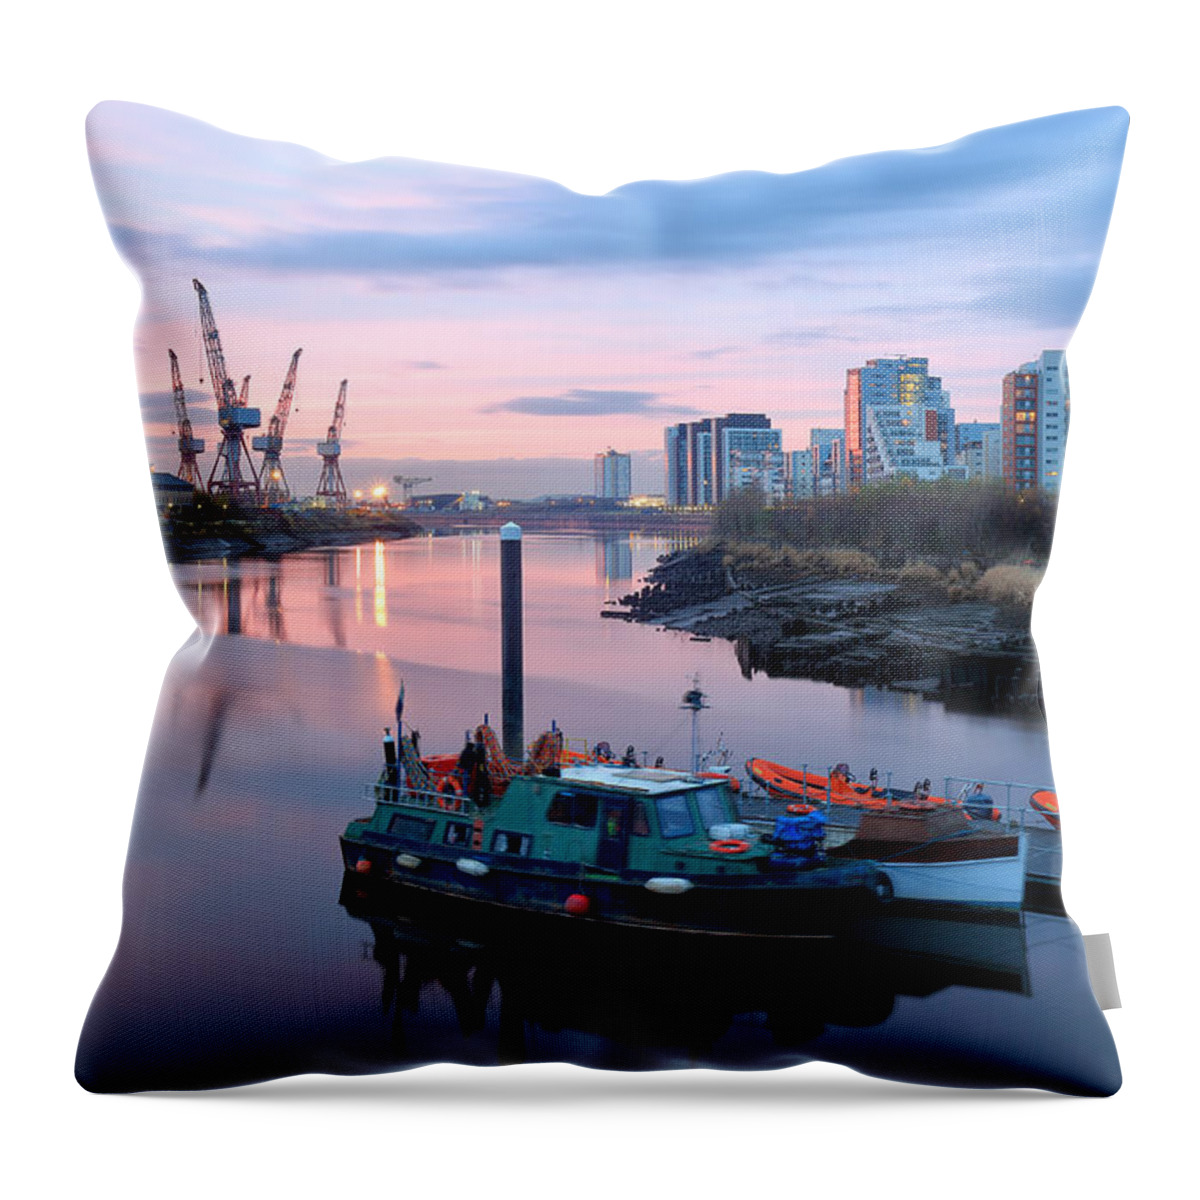  Architecture Throw Pillow featuring the photograph River Clyde View #1 by Grant Glendinning